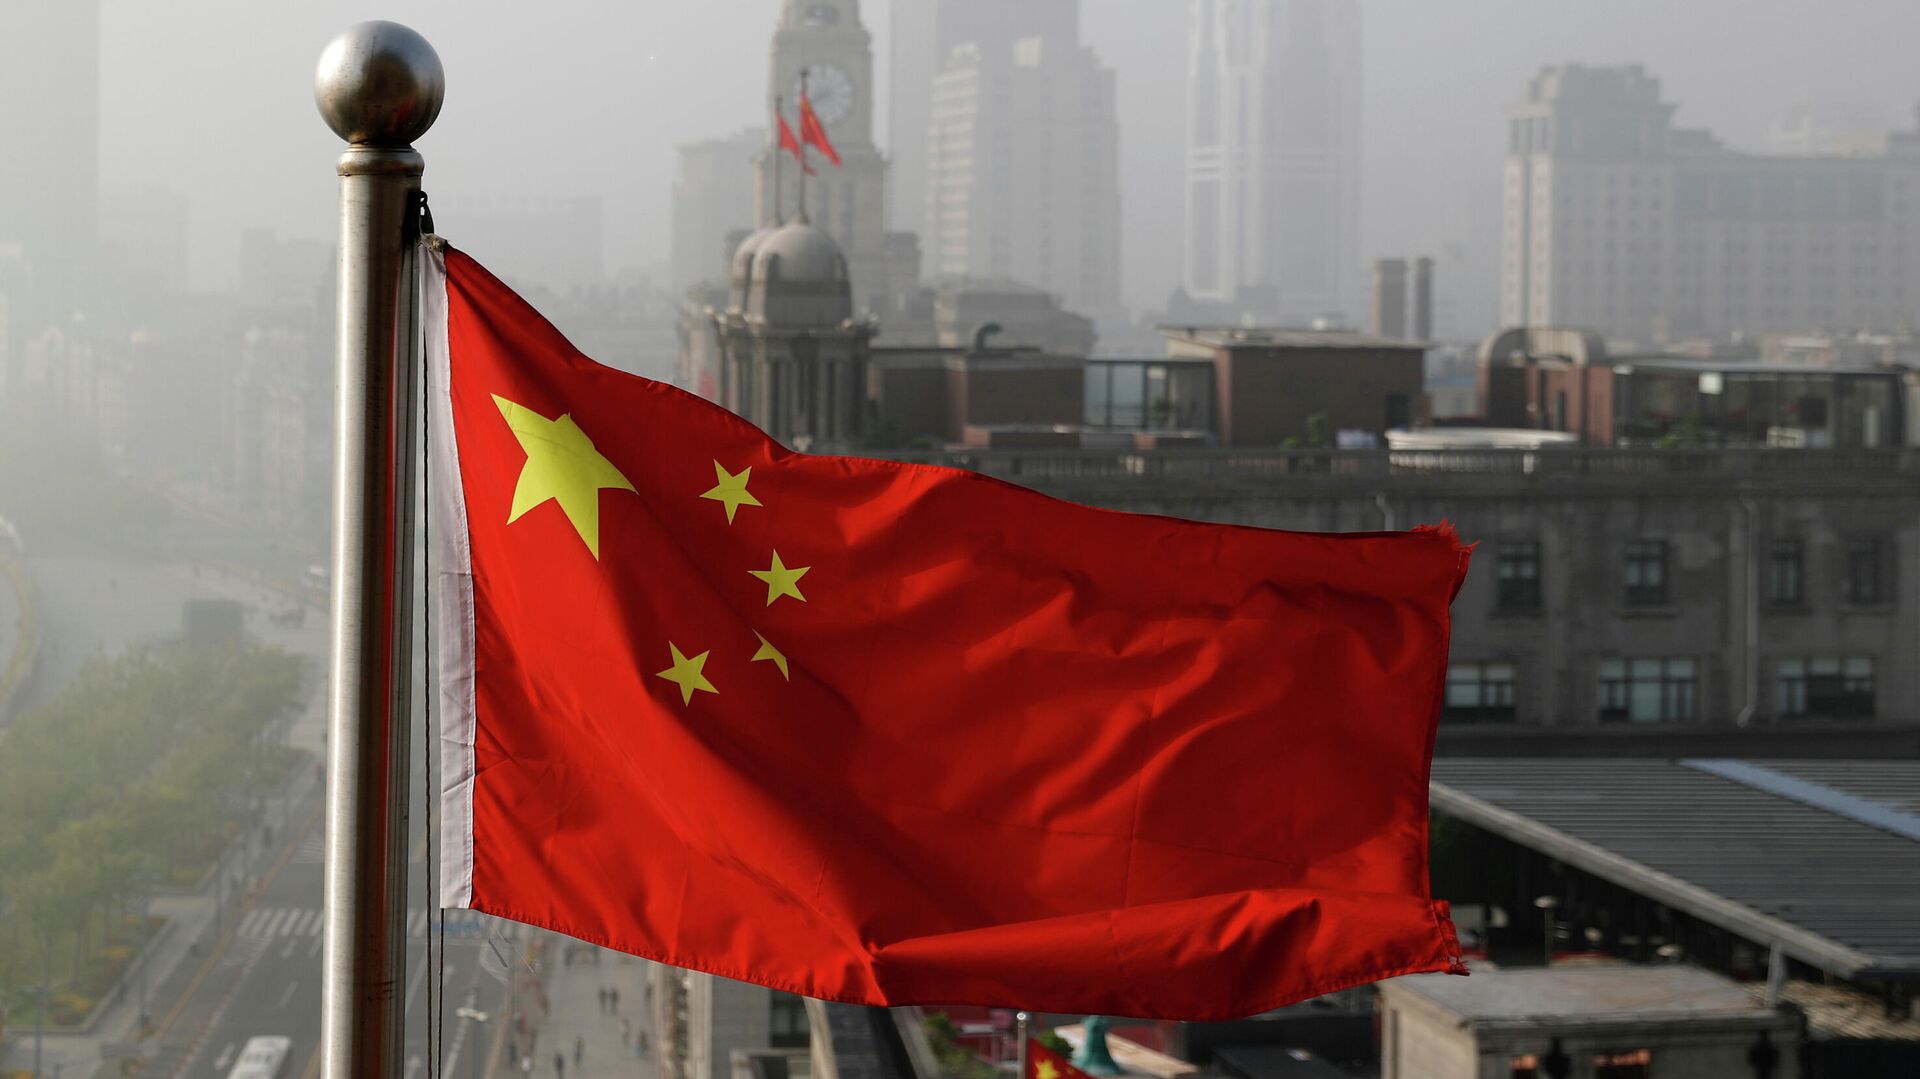 In this April 14, 2016 file photo, a Chinese national flag flutters against the office buildings in Shanghai, China.  - Sputnik International, 1920, 01.09.2022